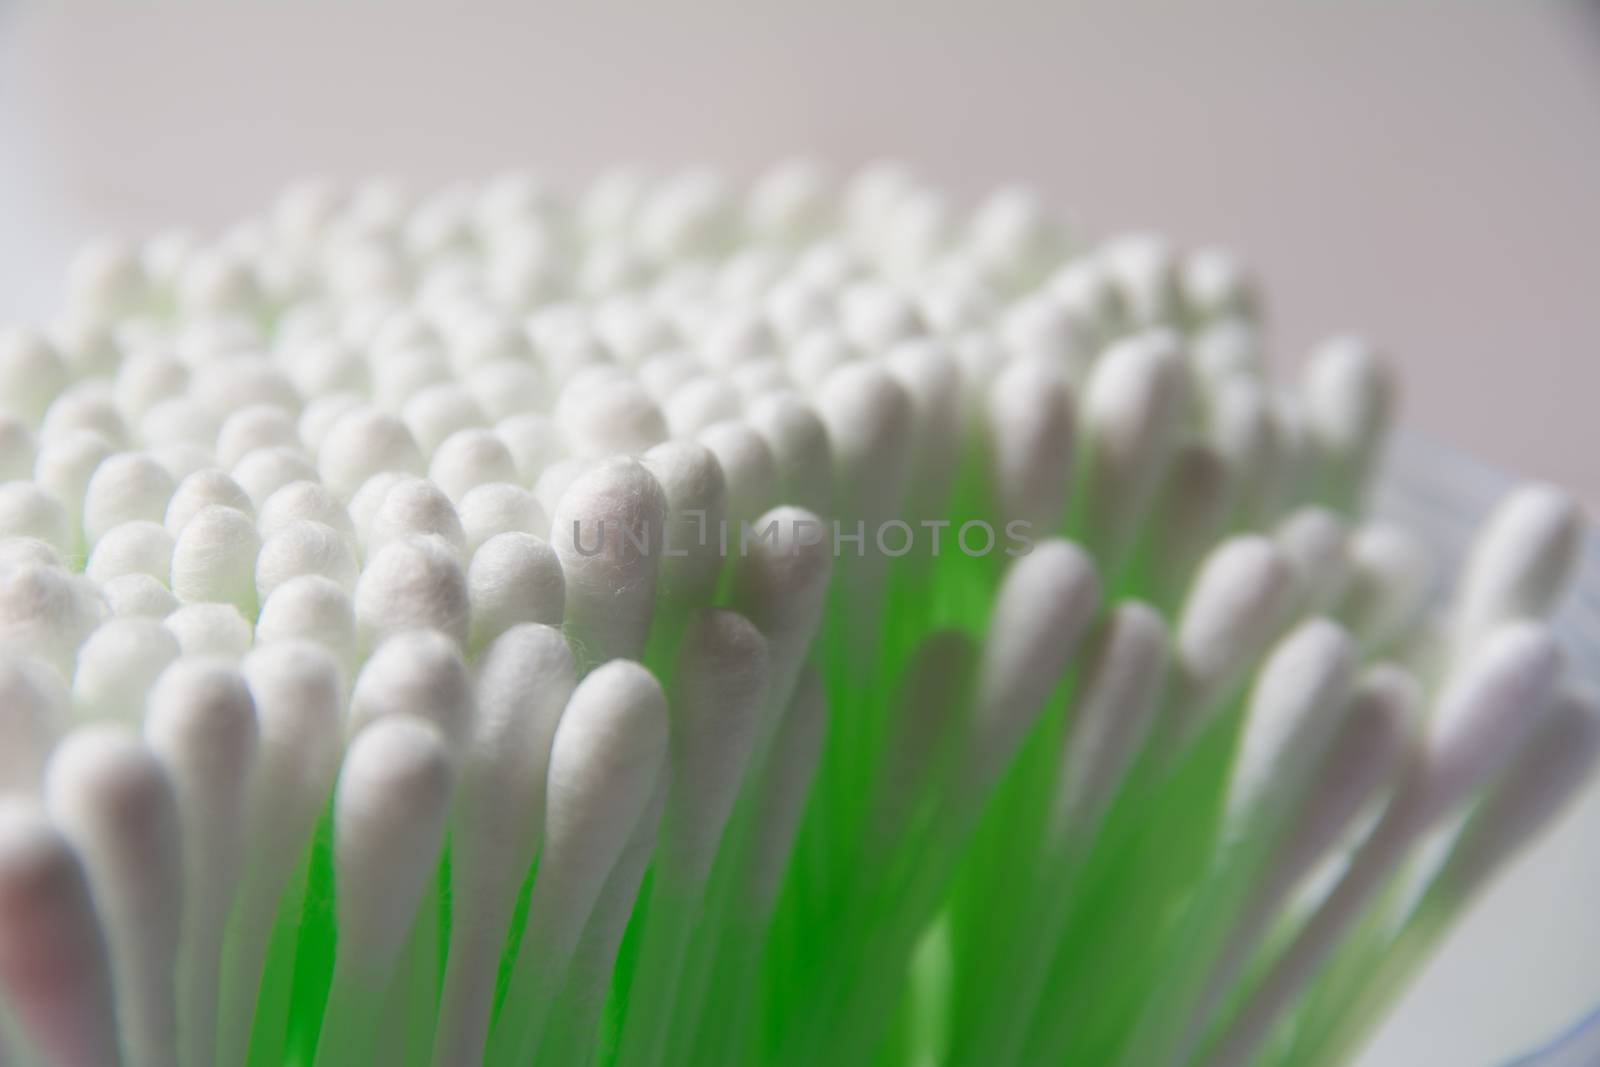 Green cotton swab bud over the grey background. Group of green plastic cotton swabs.